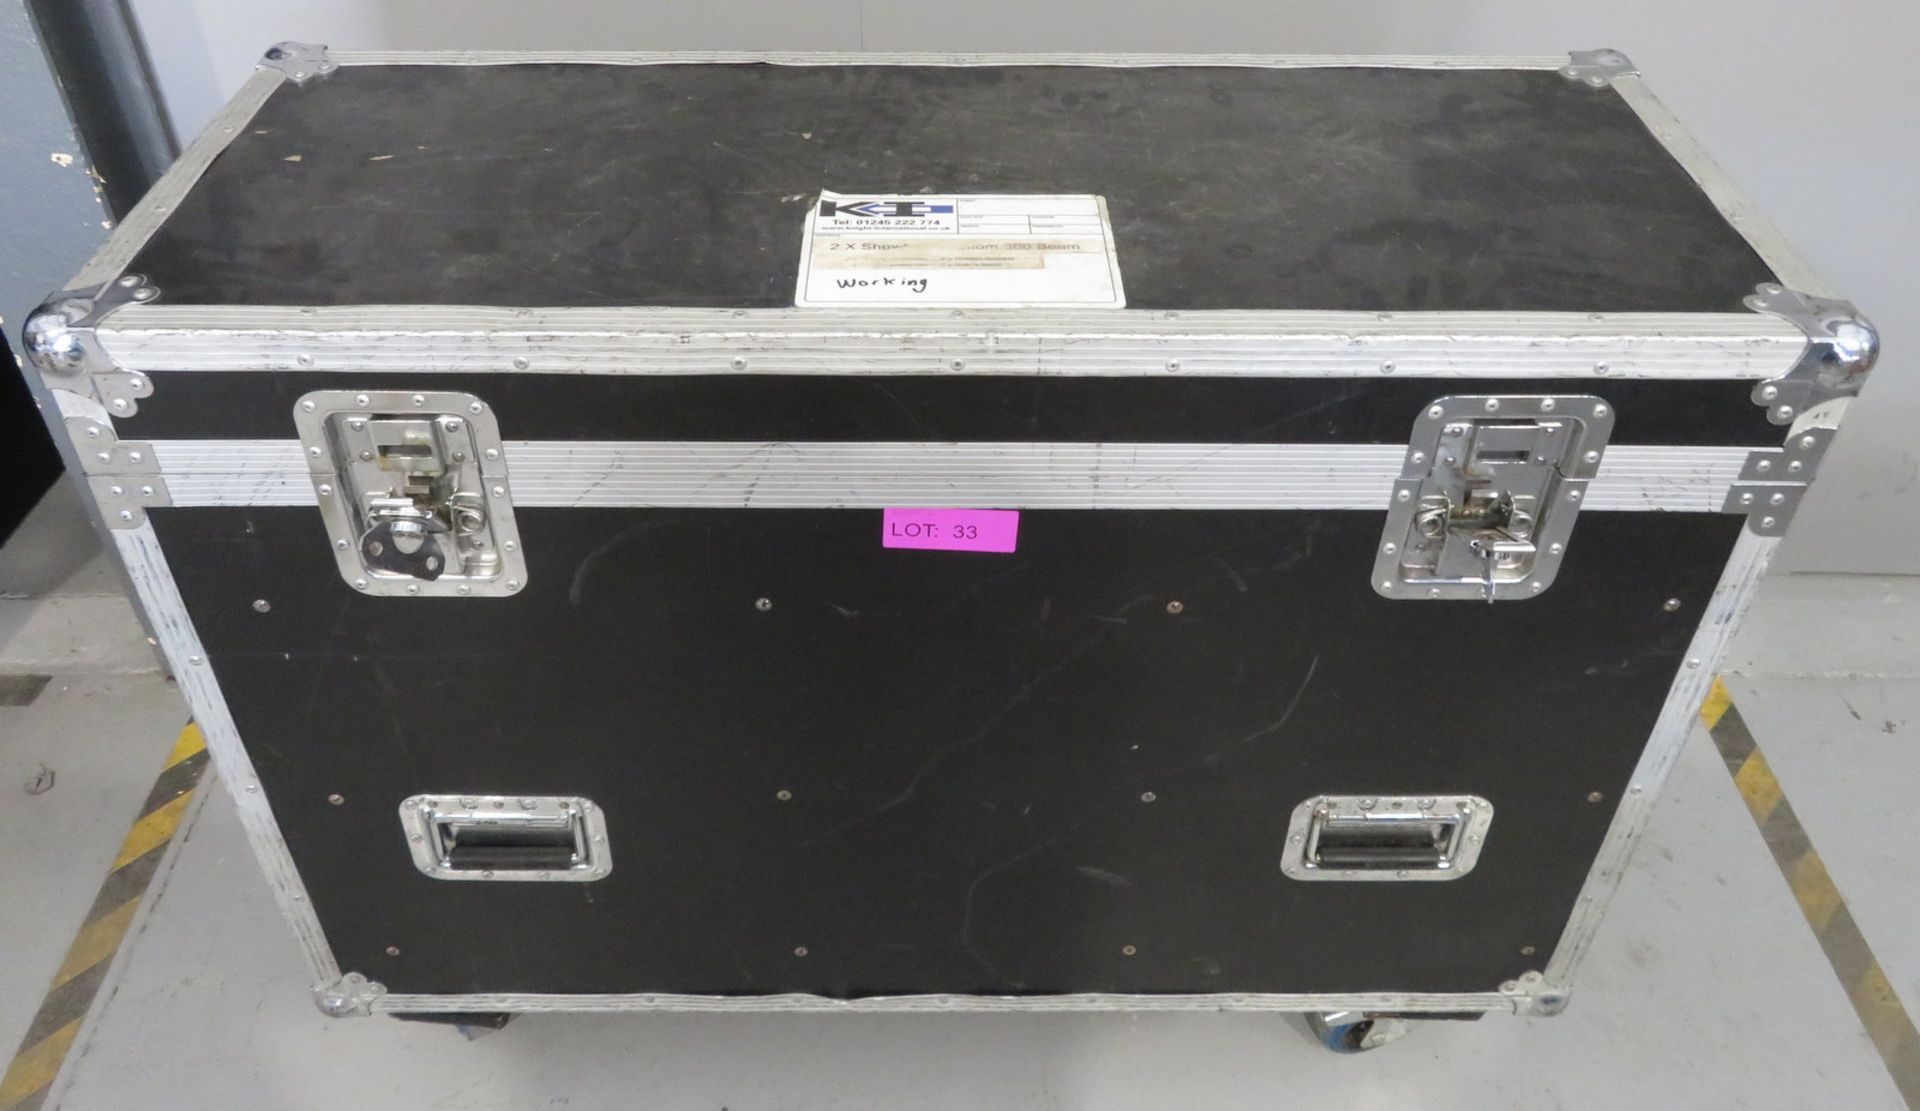 Pair of Showtec Phantom 300 Beams in flightcase. Includes hanging clamps and safety bonds. - Image 7 of 7